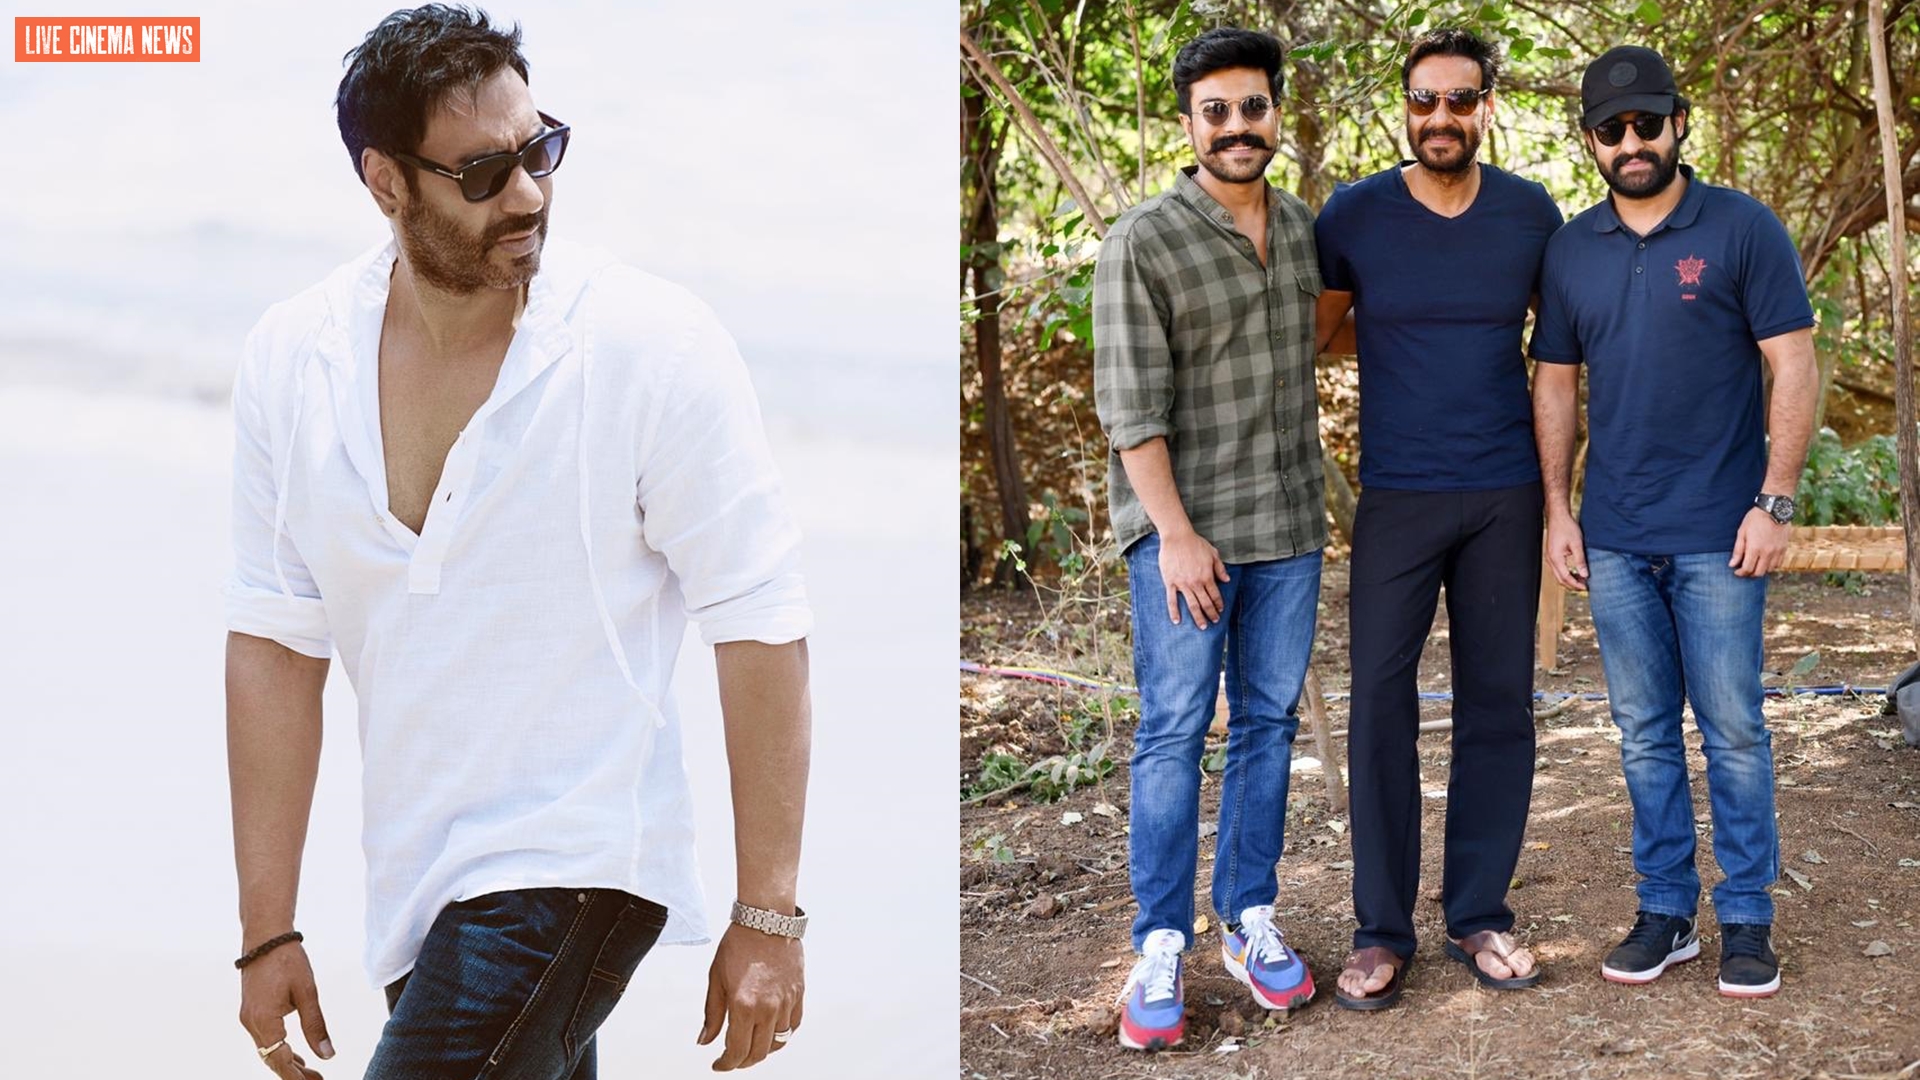 Ajay Devgn’s optimistic note: The stylish picture with caption